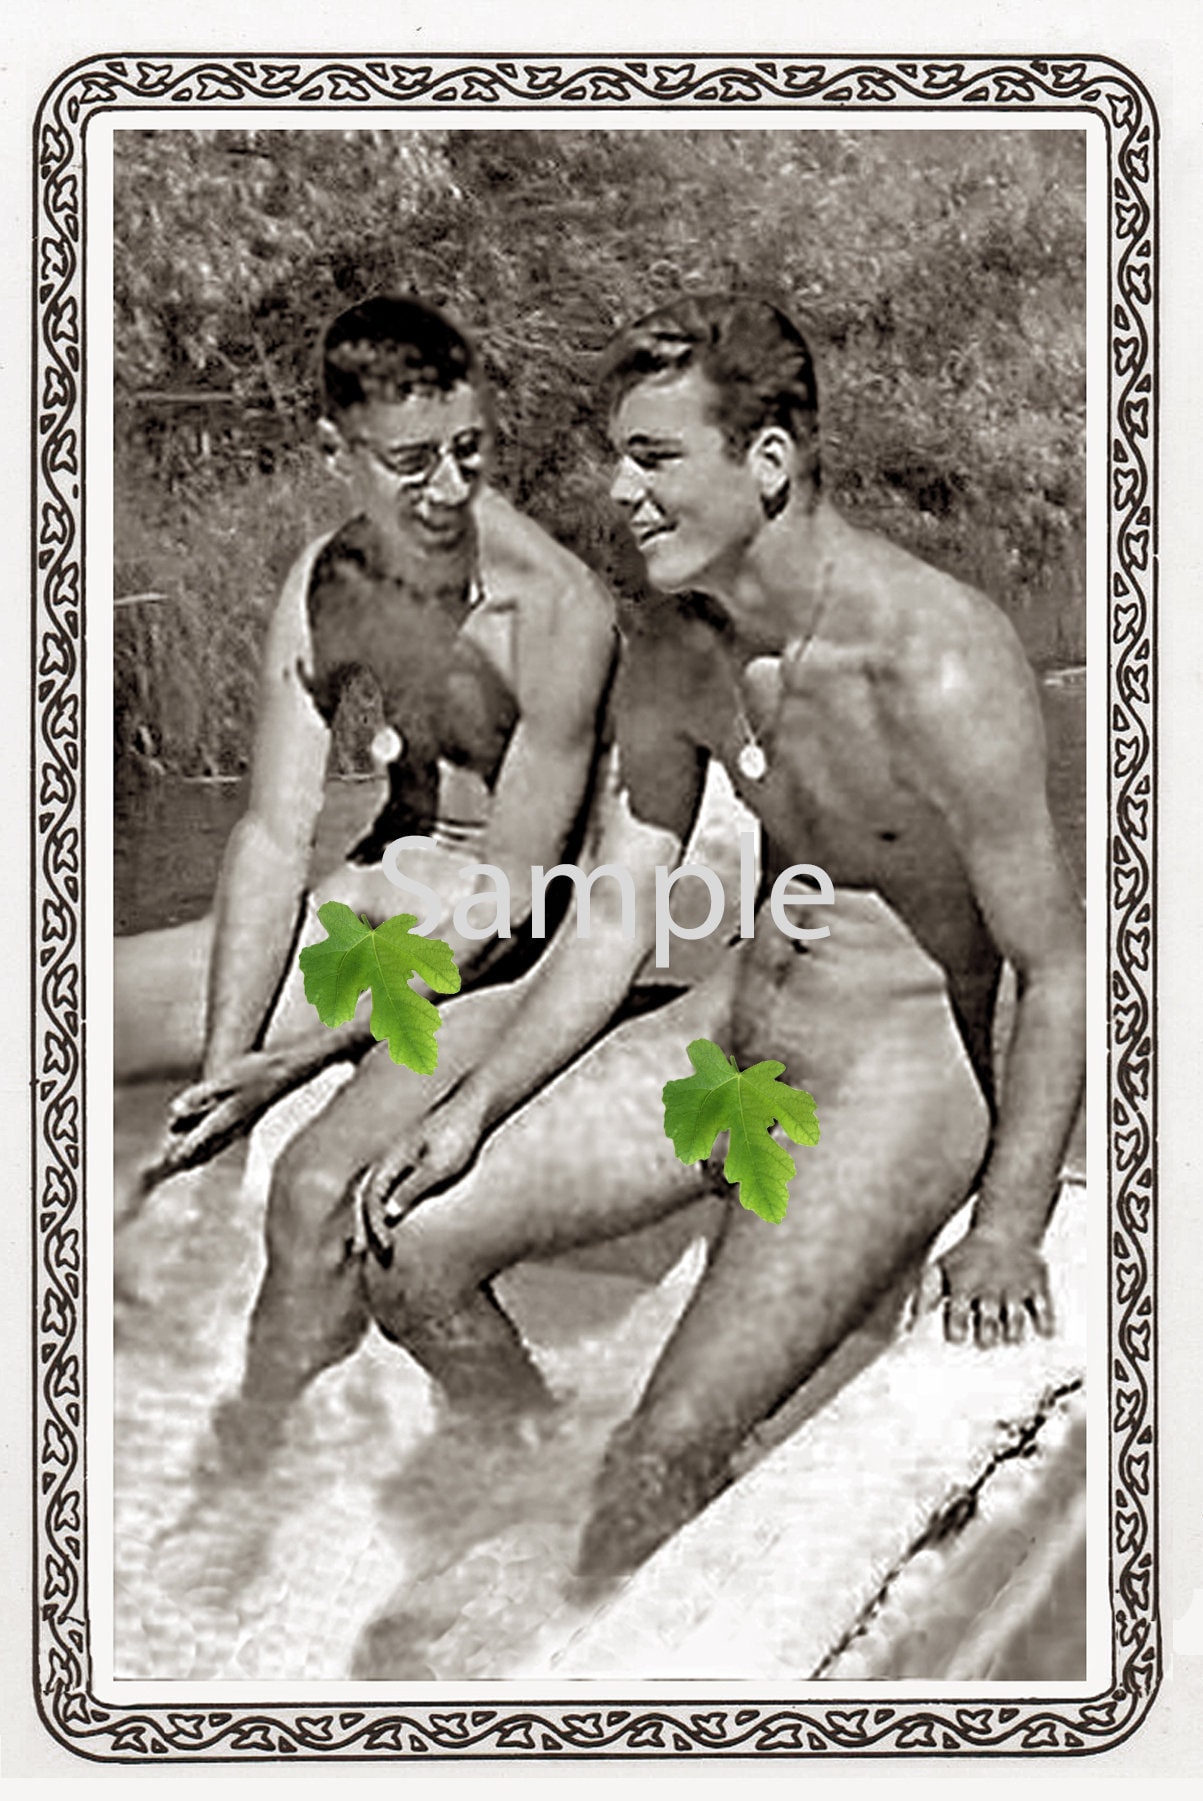 Vintage 1950s Photo Reprint Nude College Men, the Nerd & the Football Star  Share Intimate Friendship Gay Interest 59 - Etsy